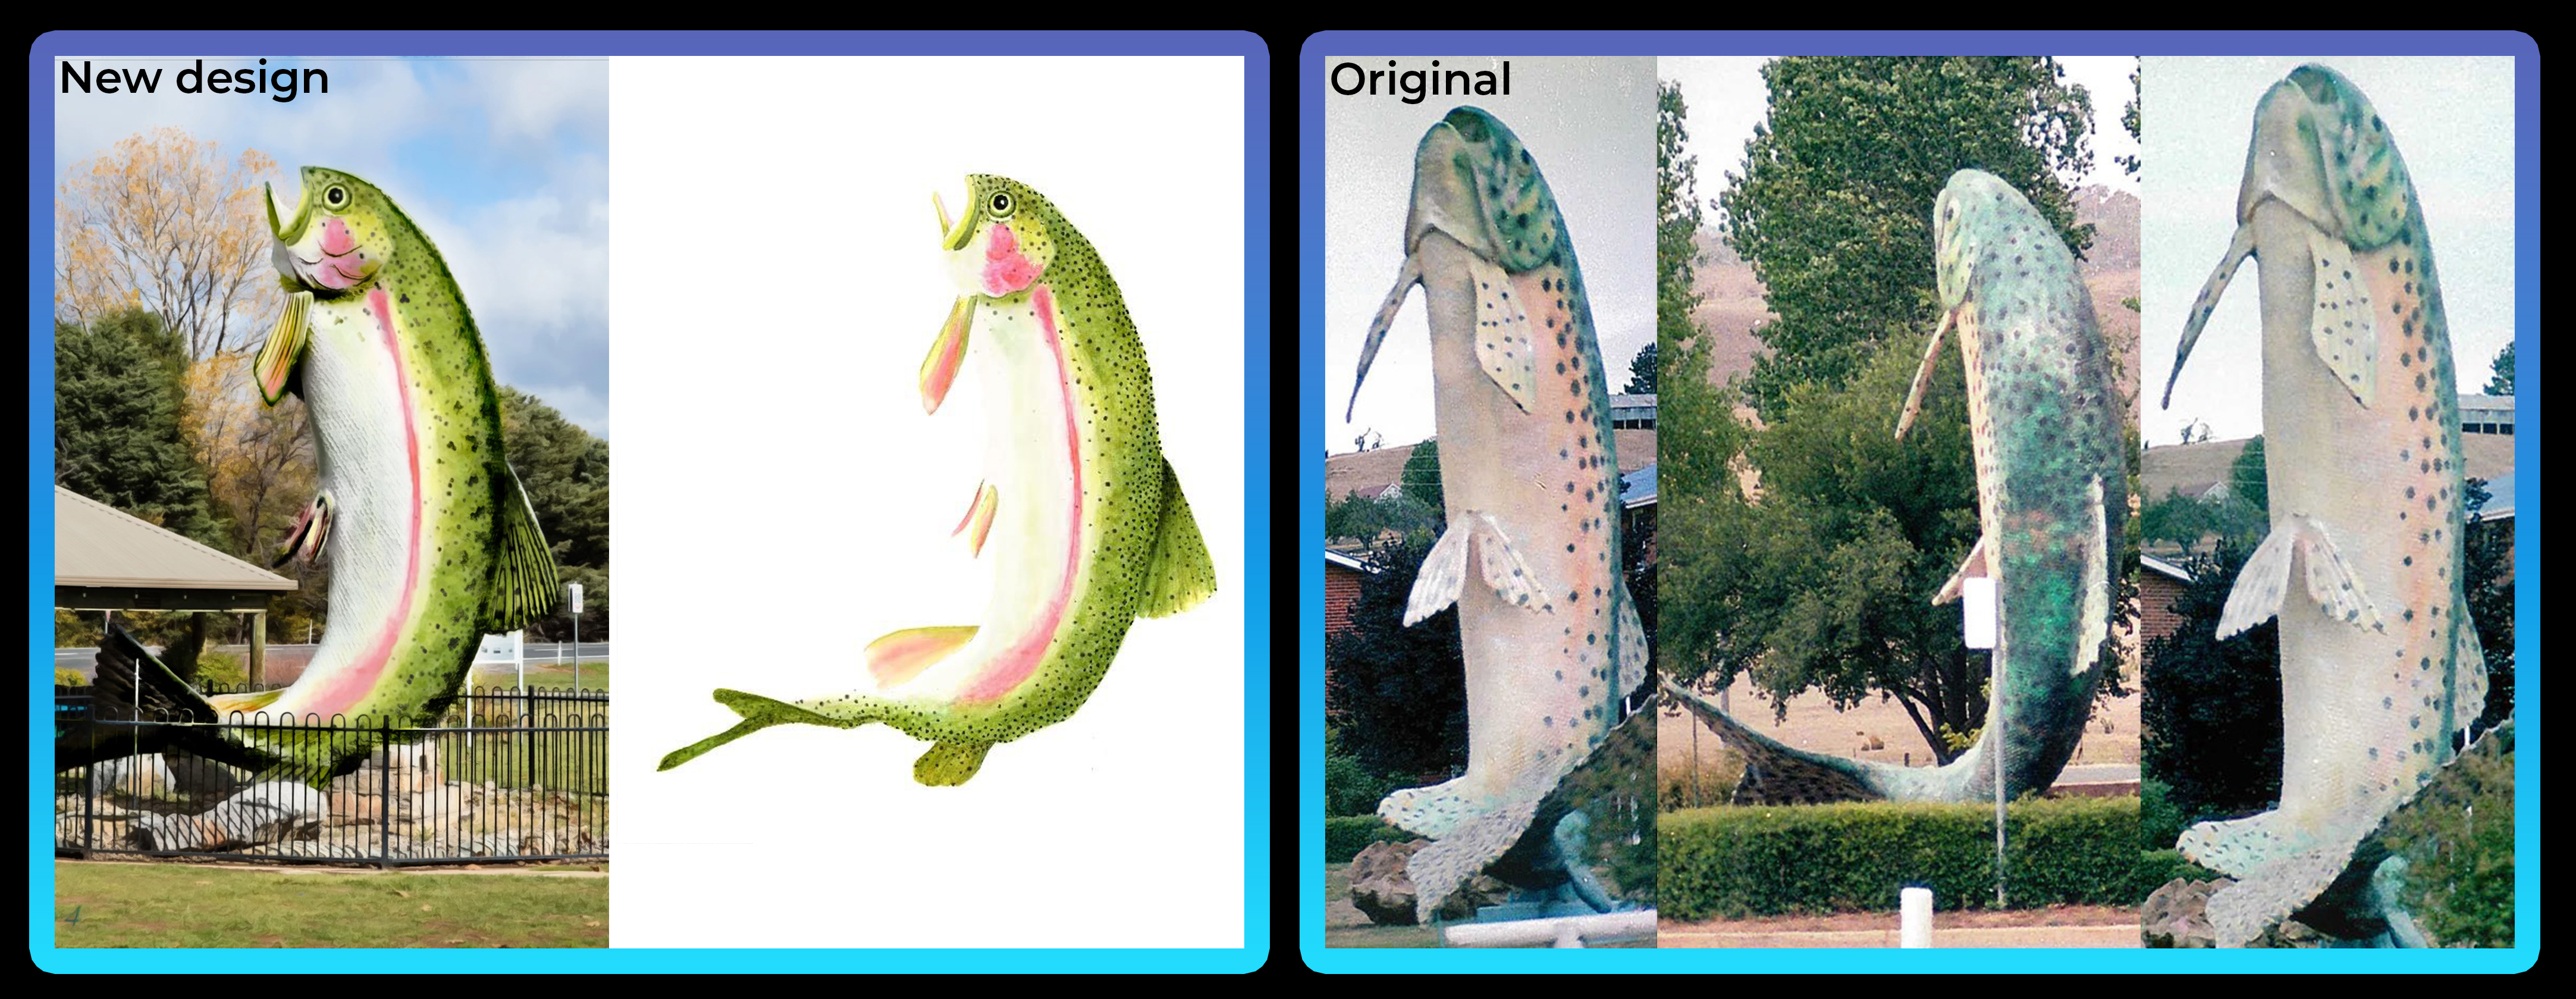 A side-by-side comparison showing multiple perspectives on the new and old Big Trout designs.